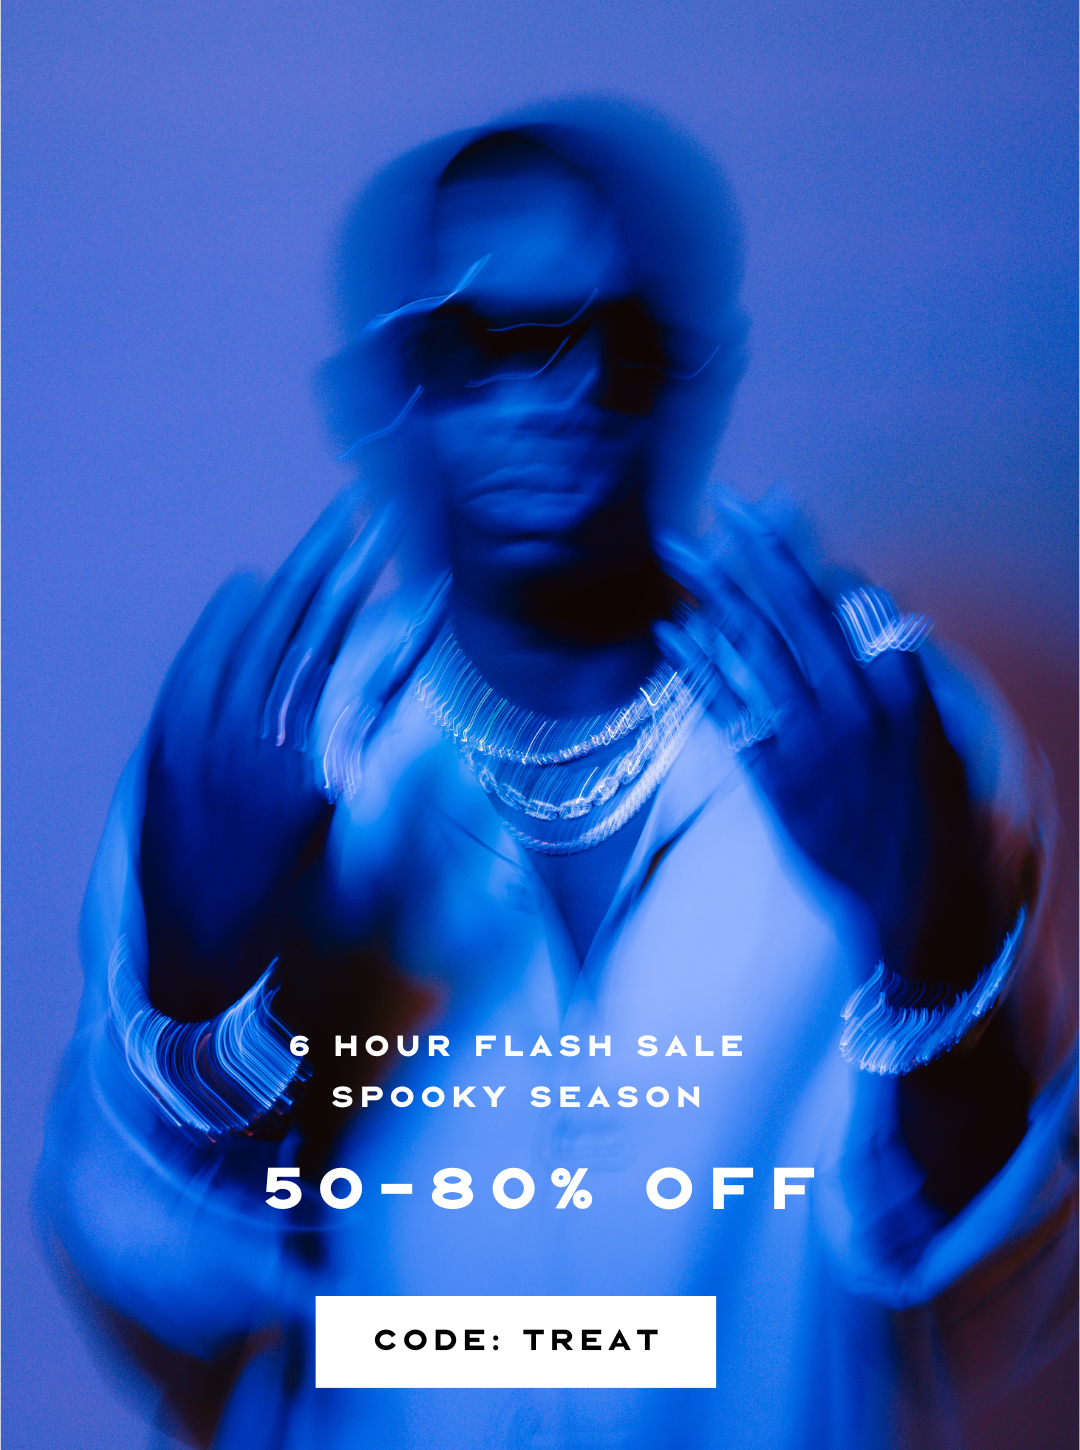 Shop 50-80% OFF for Women  Limited-Time Offer on